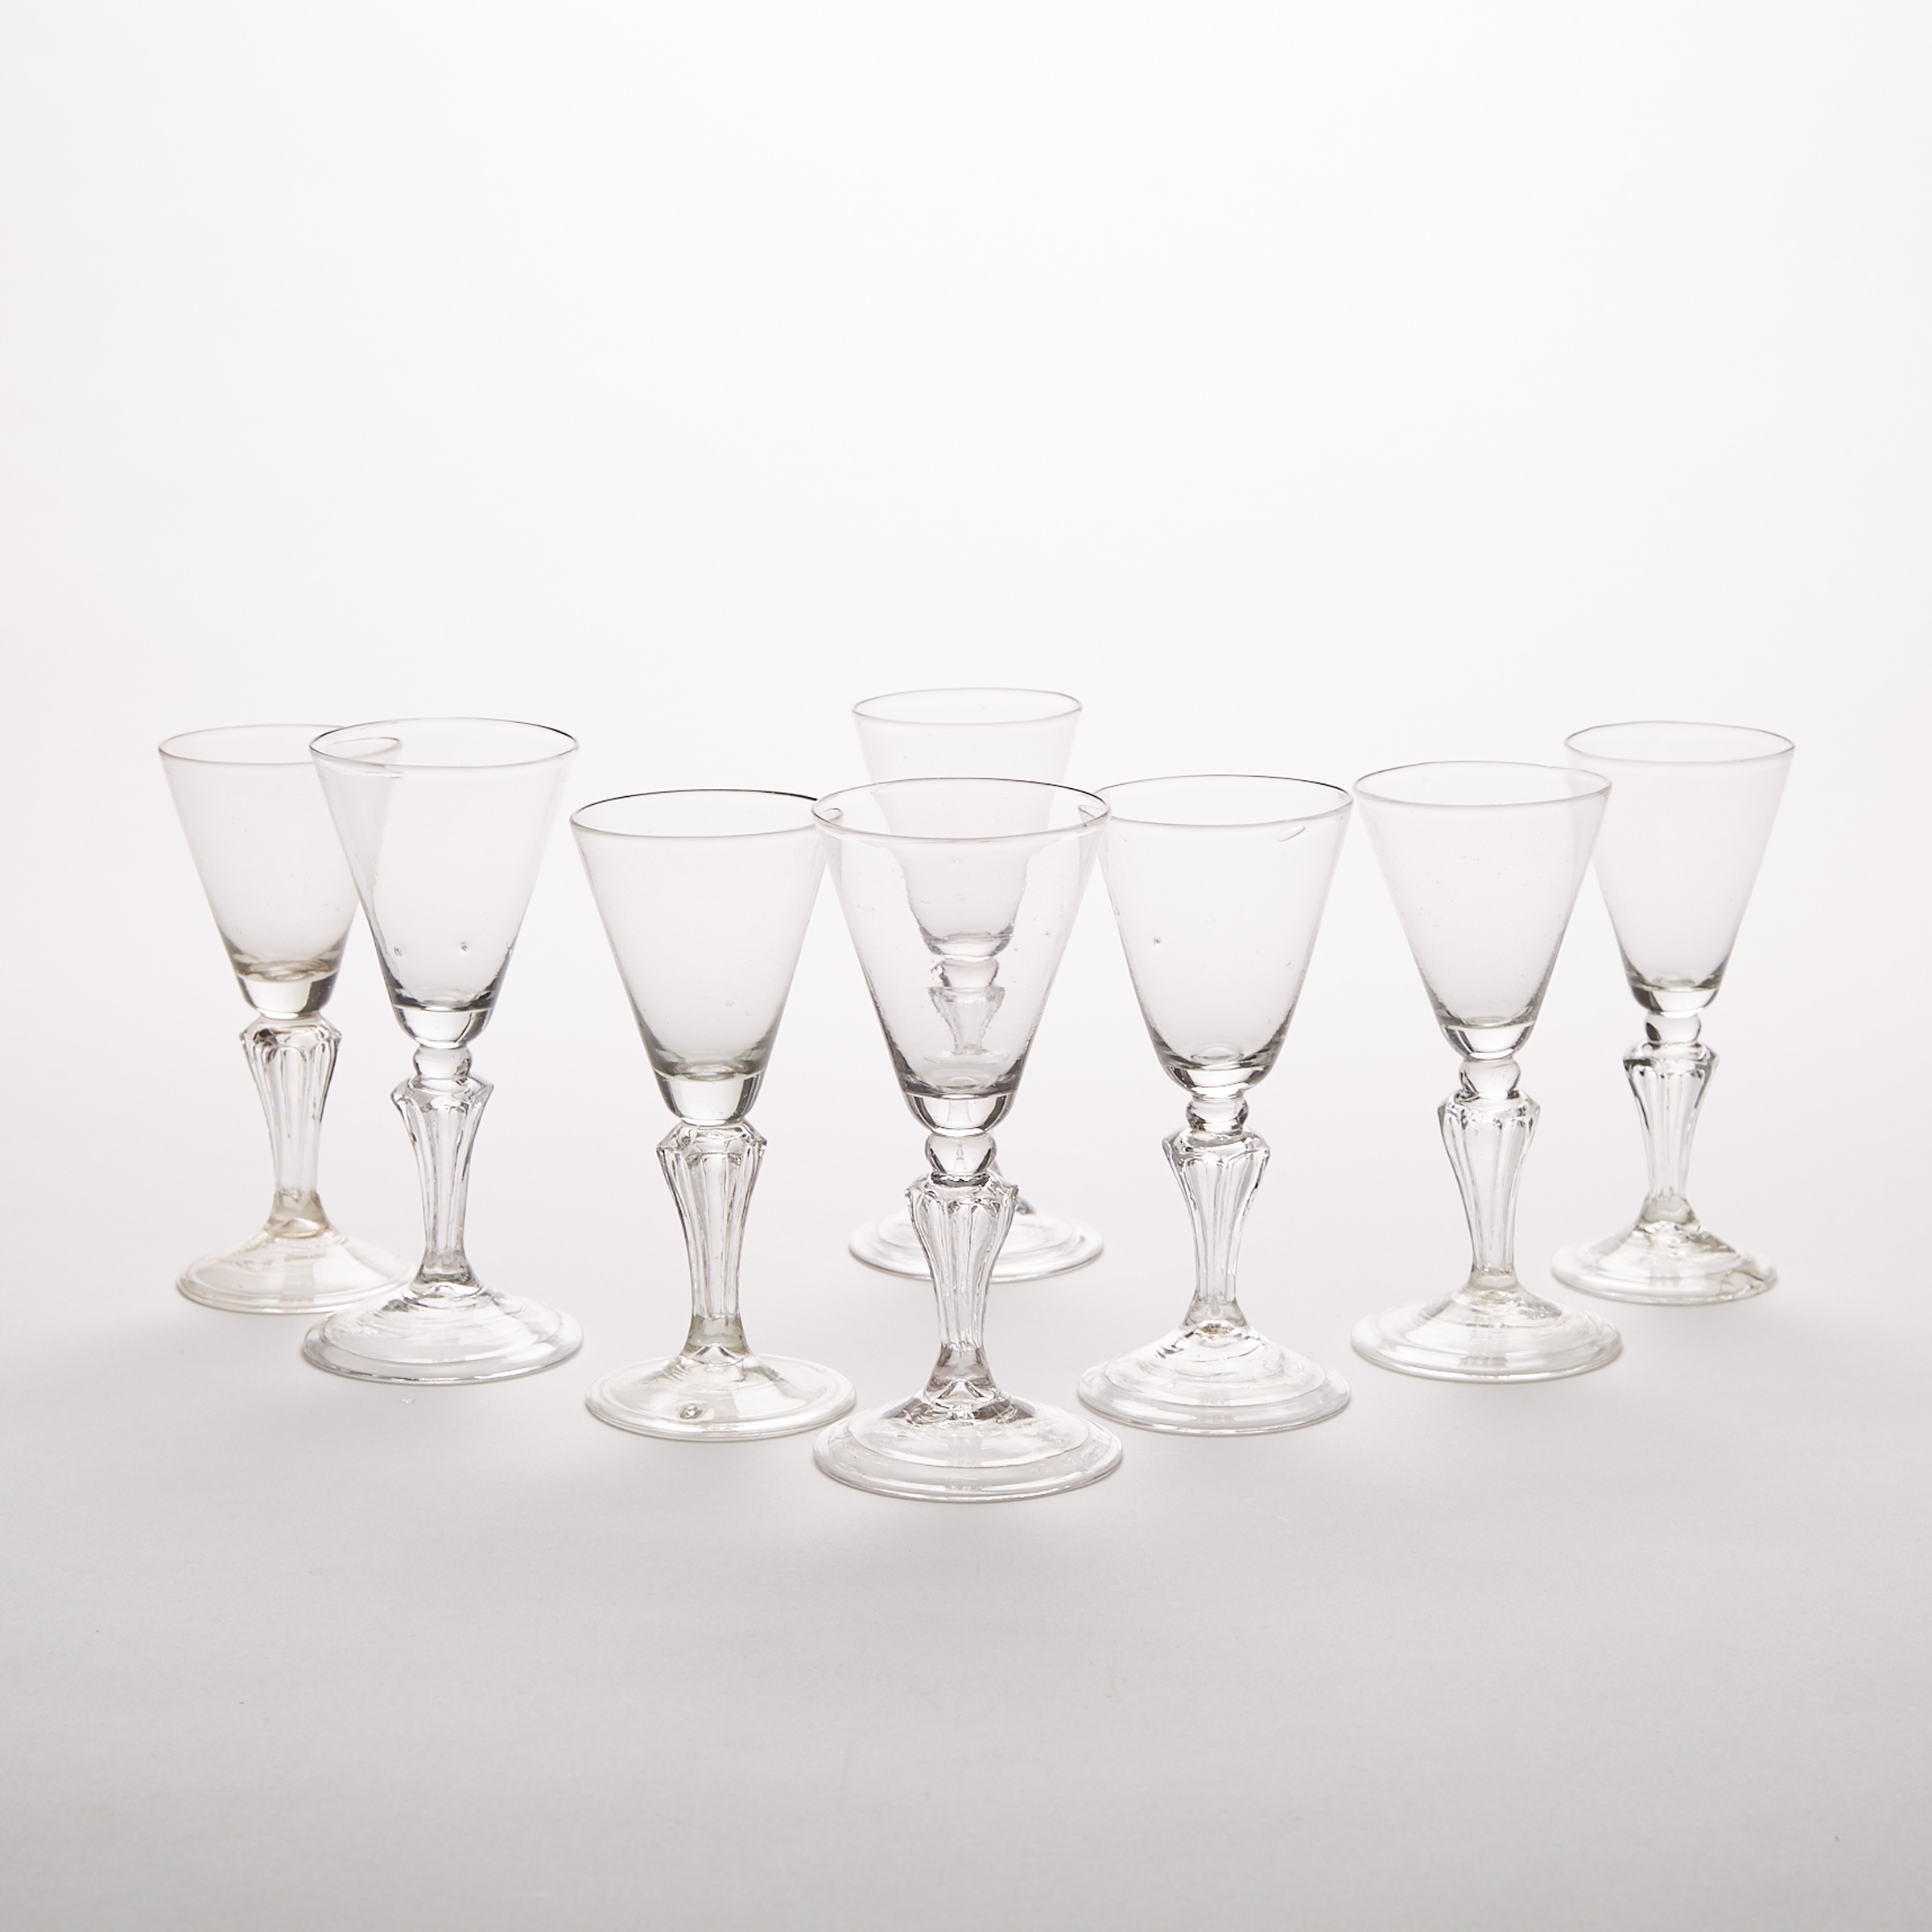 Eight Continental Silesian Stemmed Wine Glasses, mid-18th century